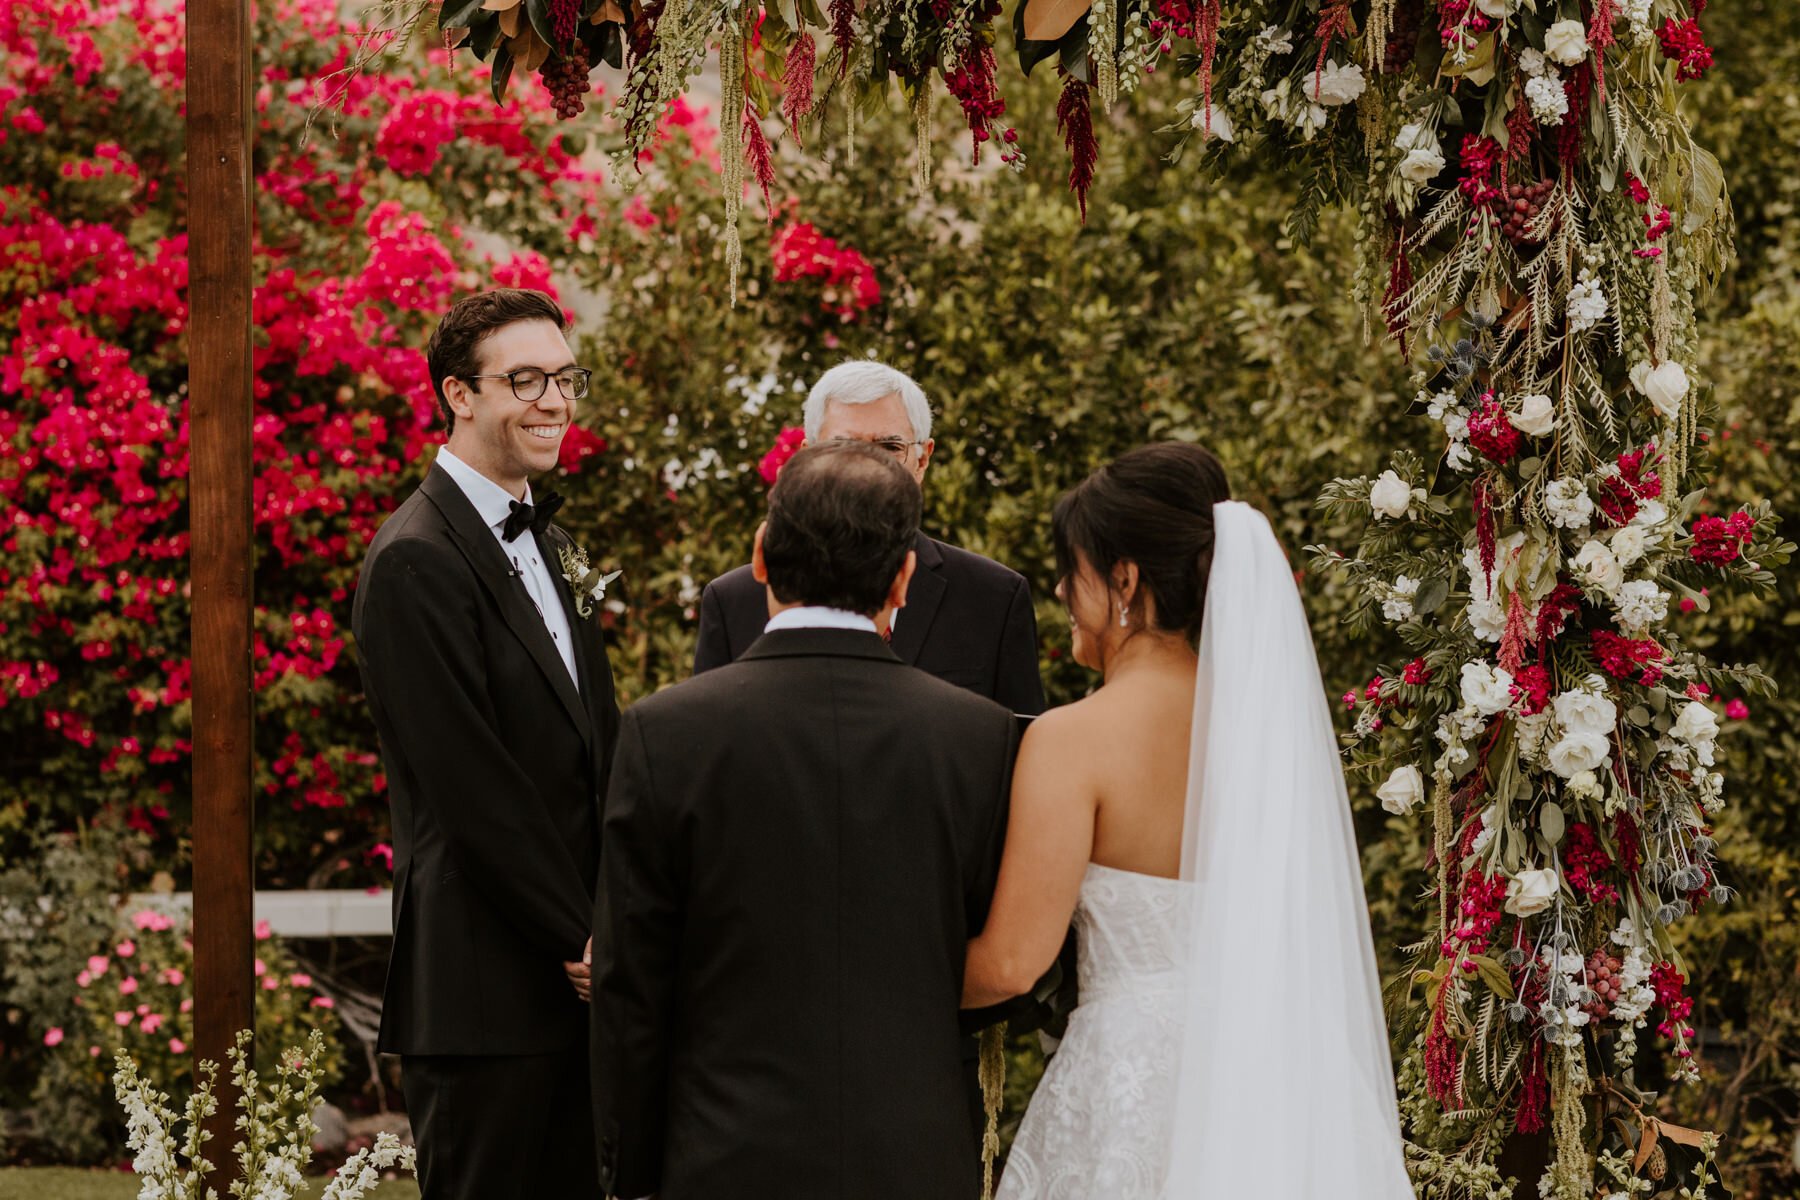 Groom seeing Bride for the first time, Spencer’s Restaurant Palm Springs Wedding, Palm Springs Wedding Photographer | Tida Svy Photo